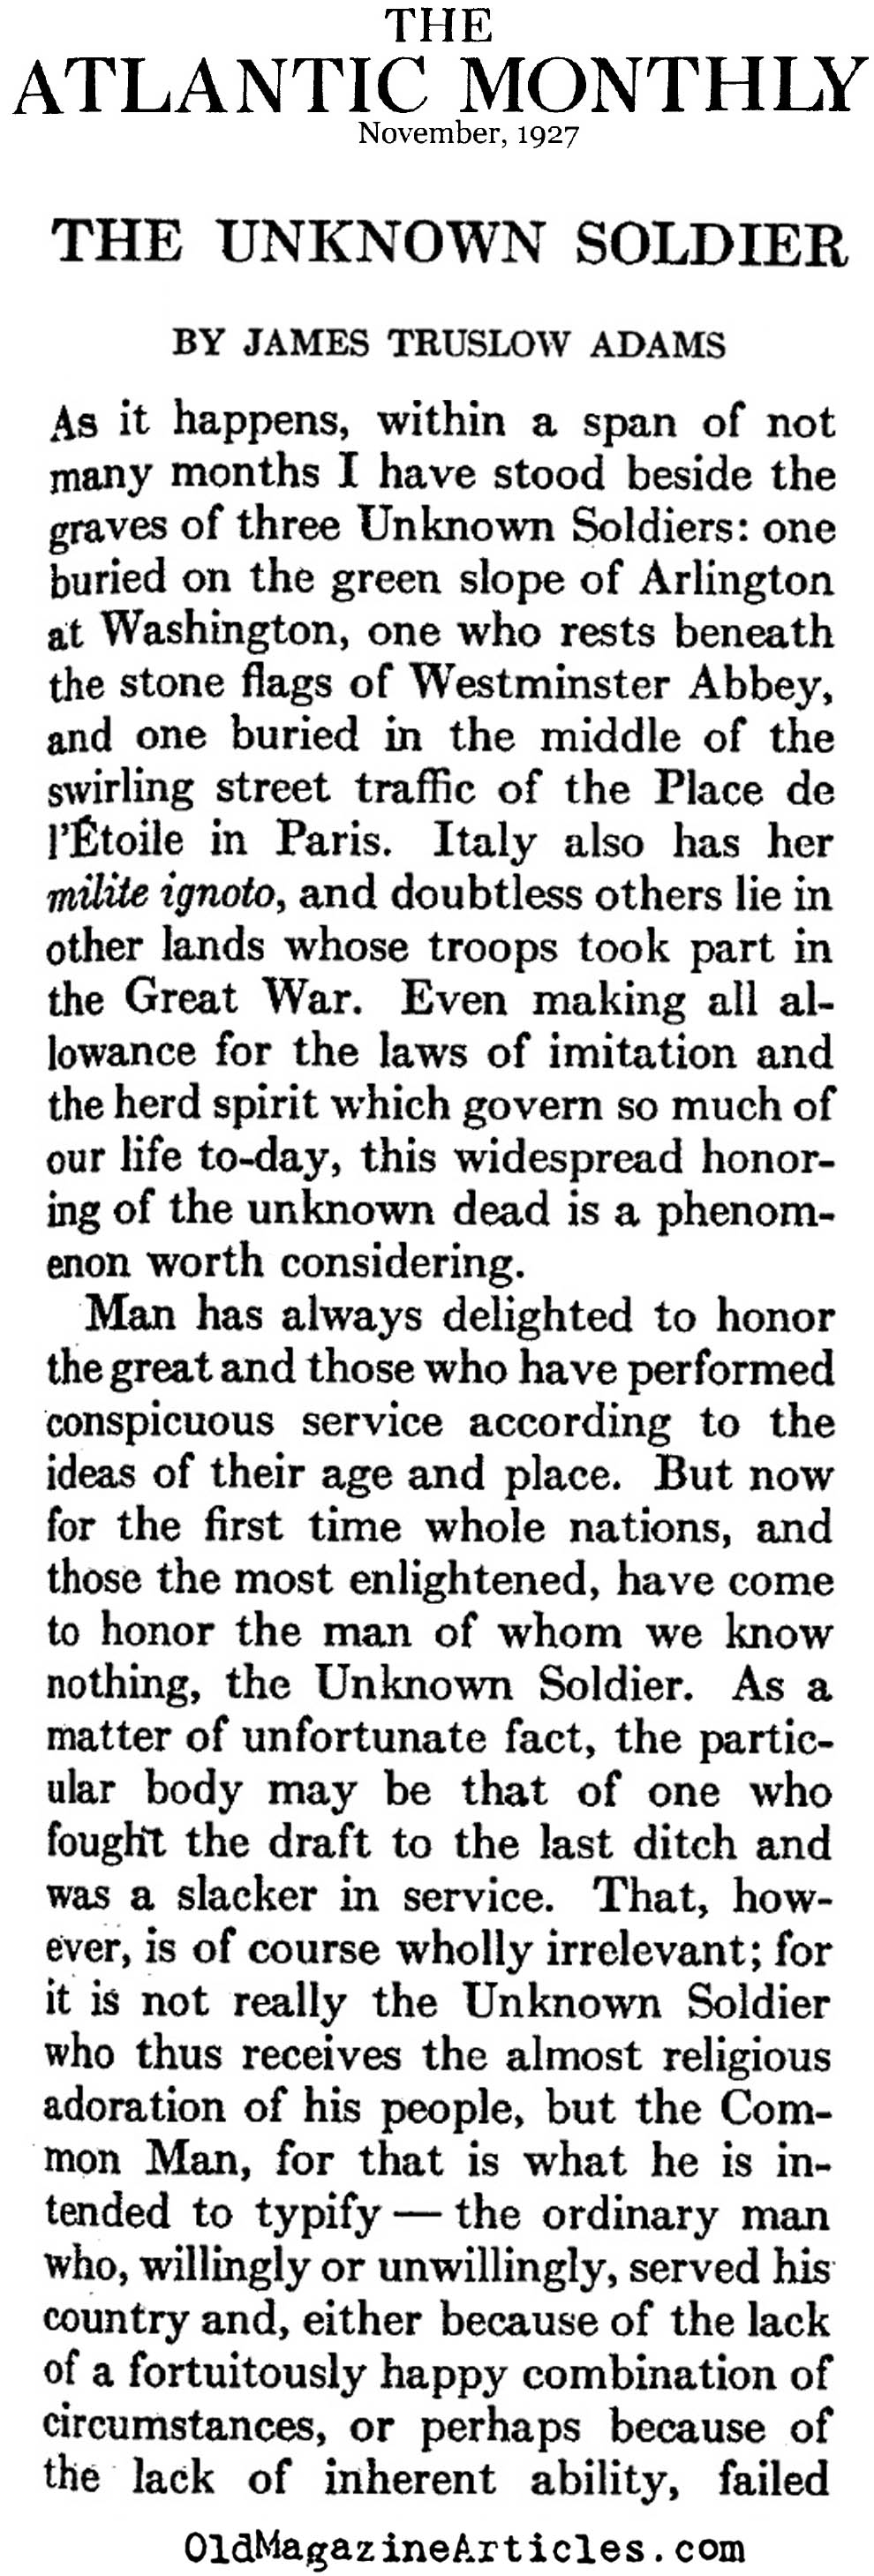 The Unknown Soldier (The Atlantic Monthly, 1927)